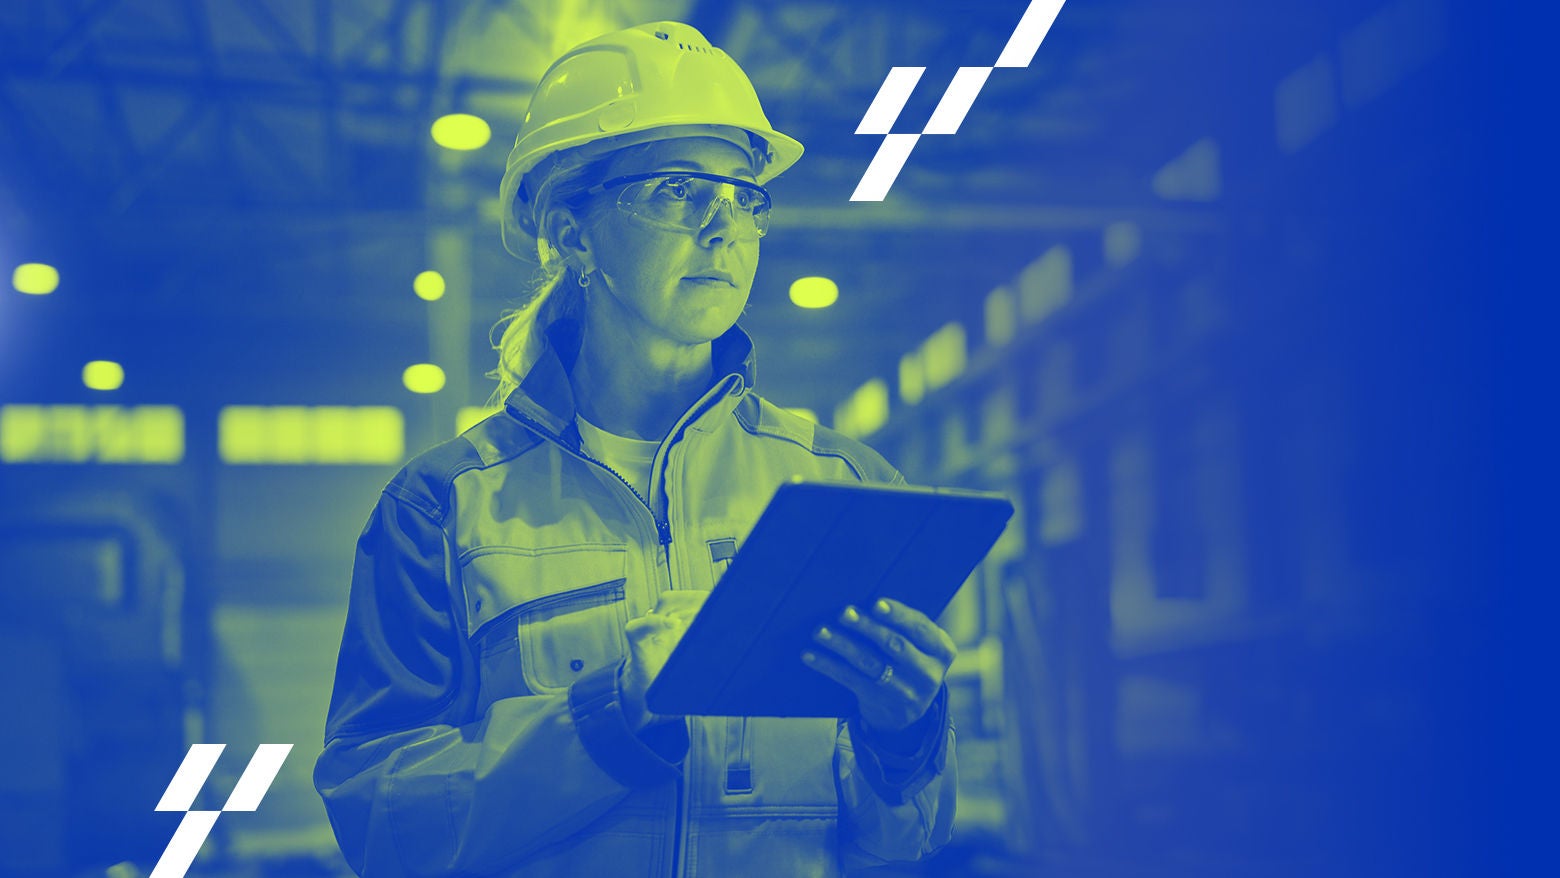 Professional Heavy Industry Engineer/Worker Wearing Safety Uniform and Hard Hat Uses Tablet Computer. Serious Successful Female Industrial Specialist Walking in a Metal Manufacture Warehouse.